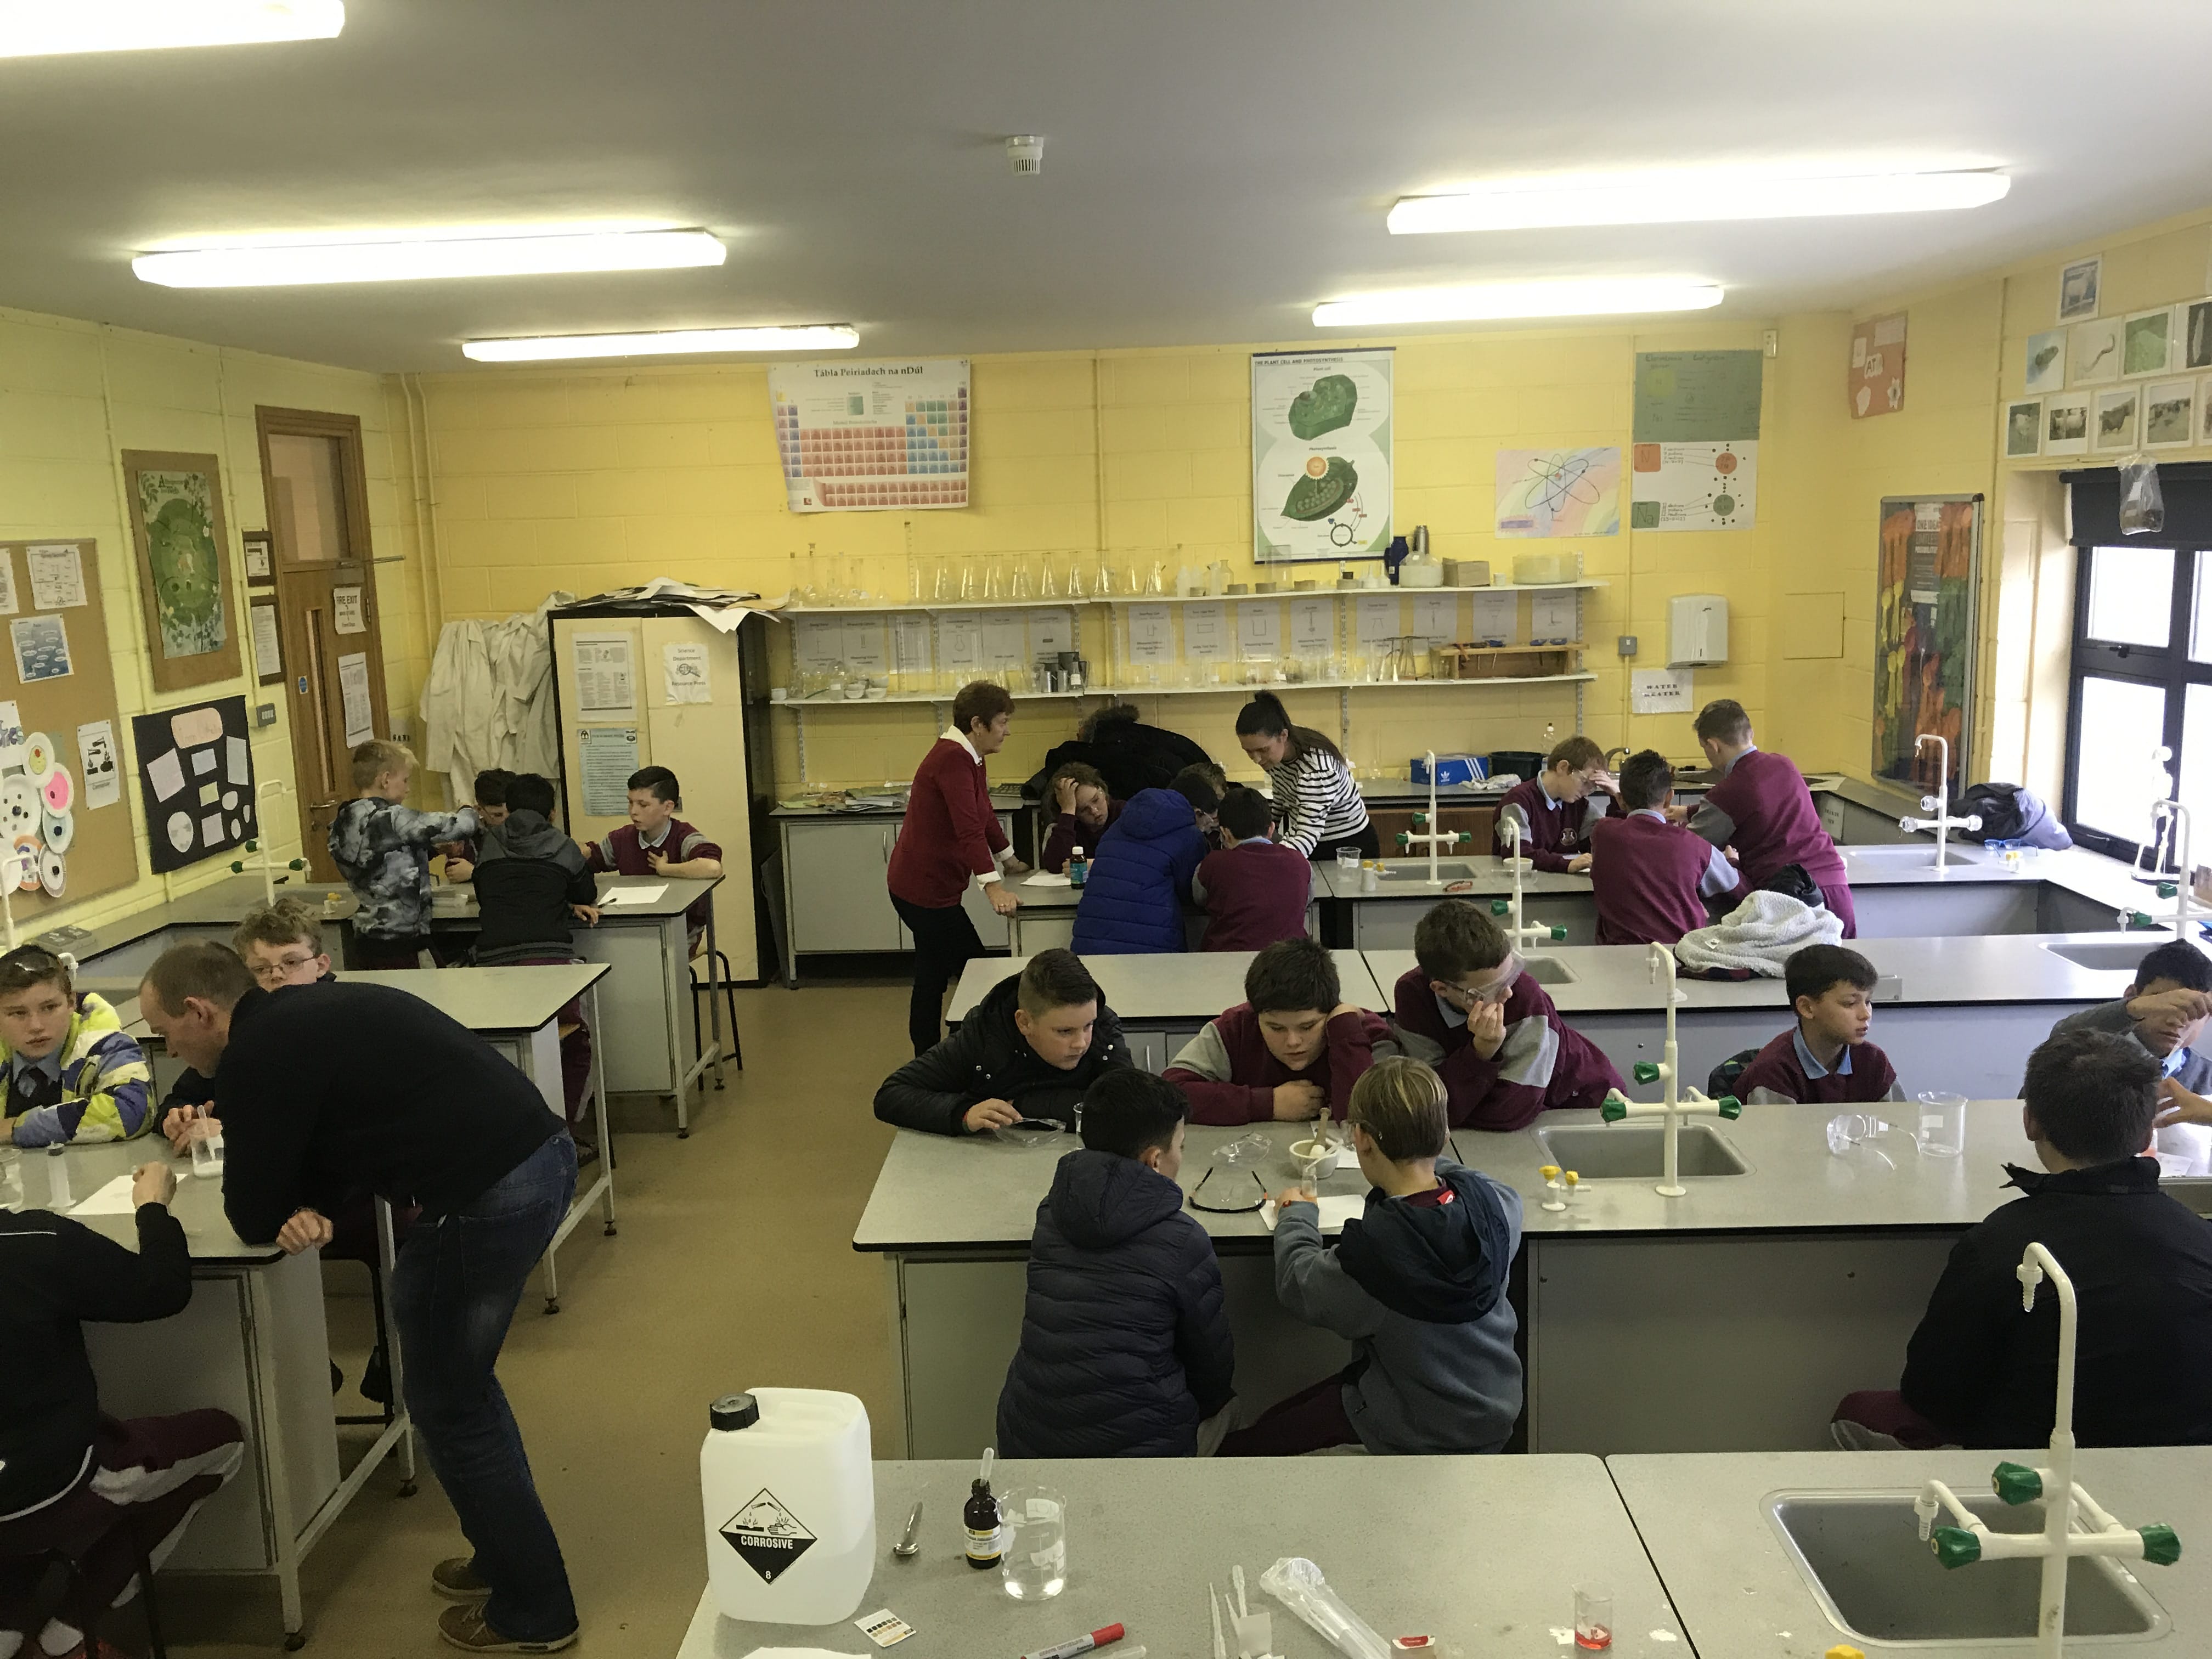 Desmond College students working with primary school students to put together a project for the Primary Science Fair in January 2018 